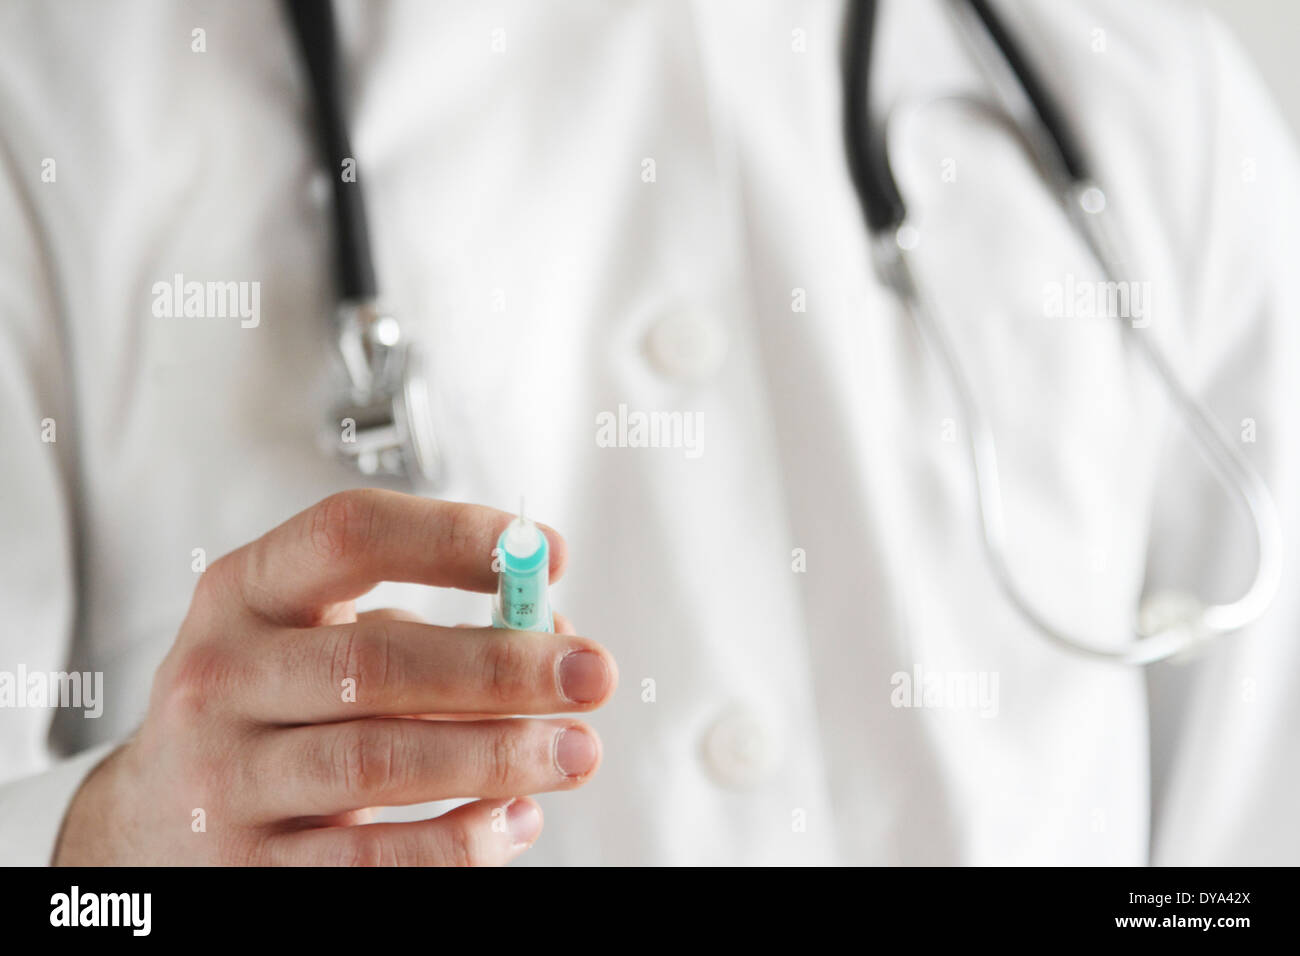 young doctor with white coat and stethoscope wit a syringe Stock Photo